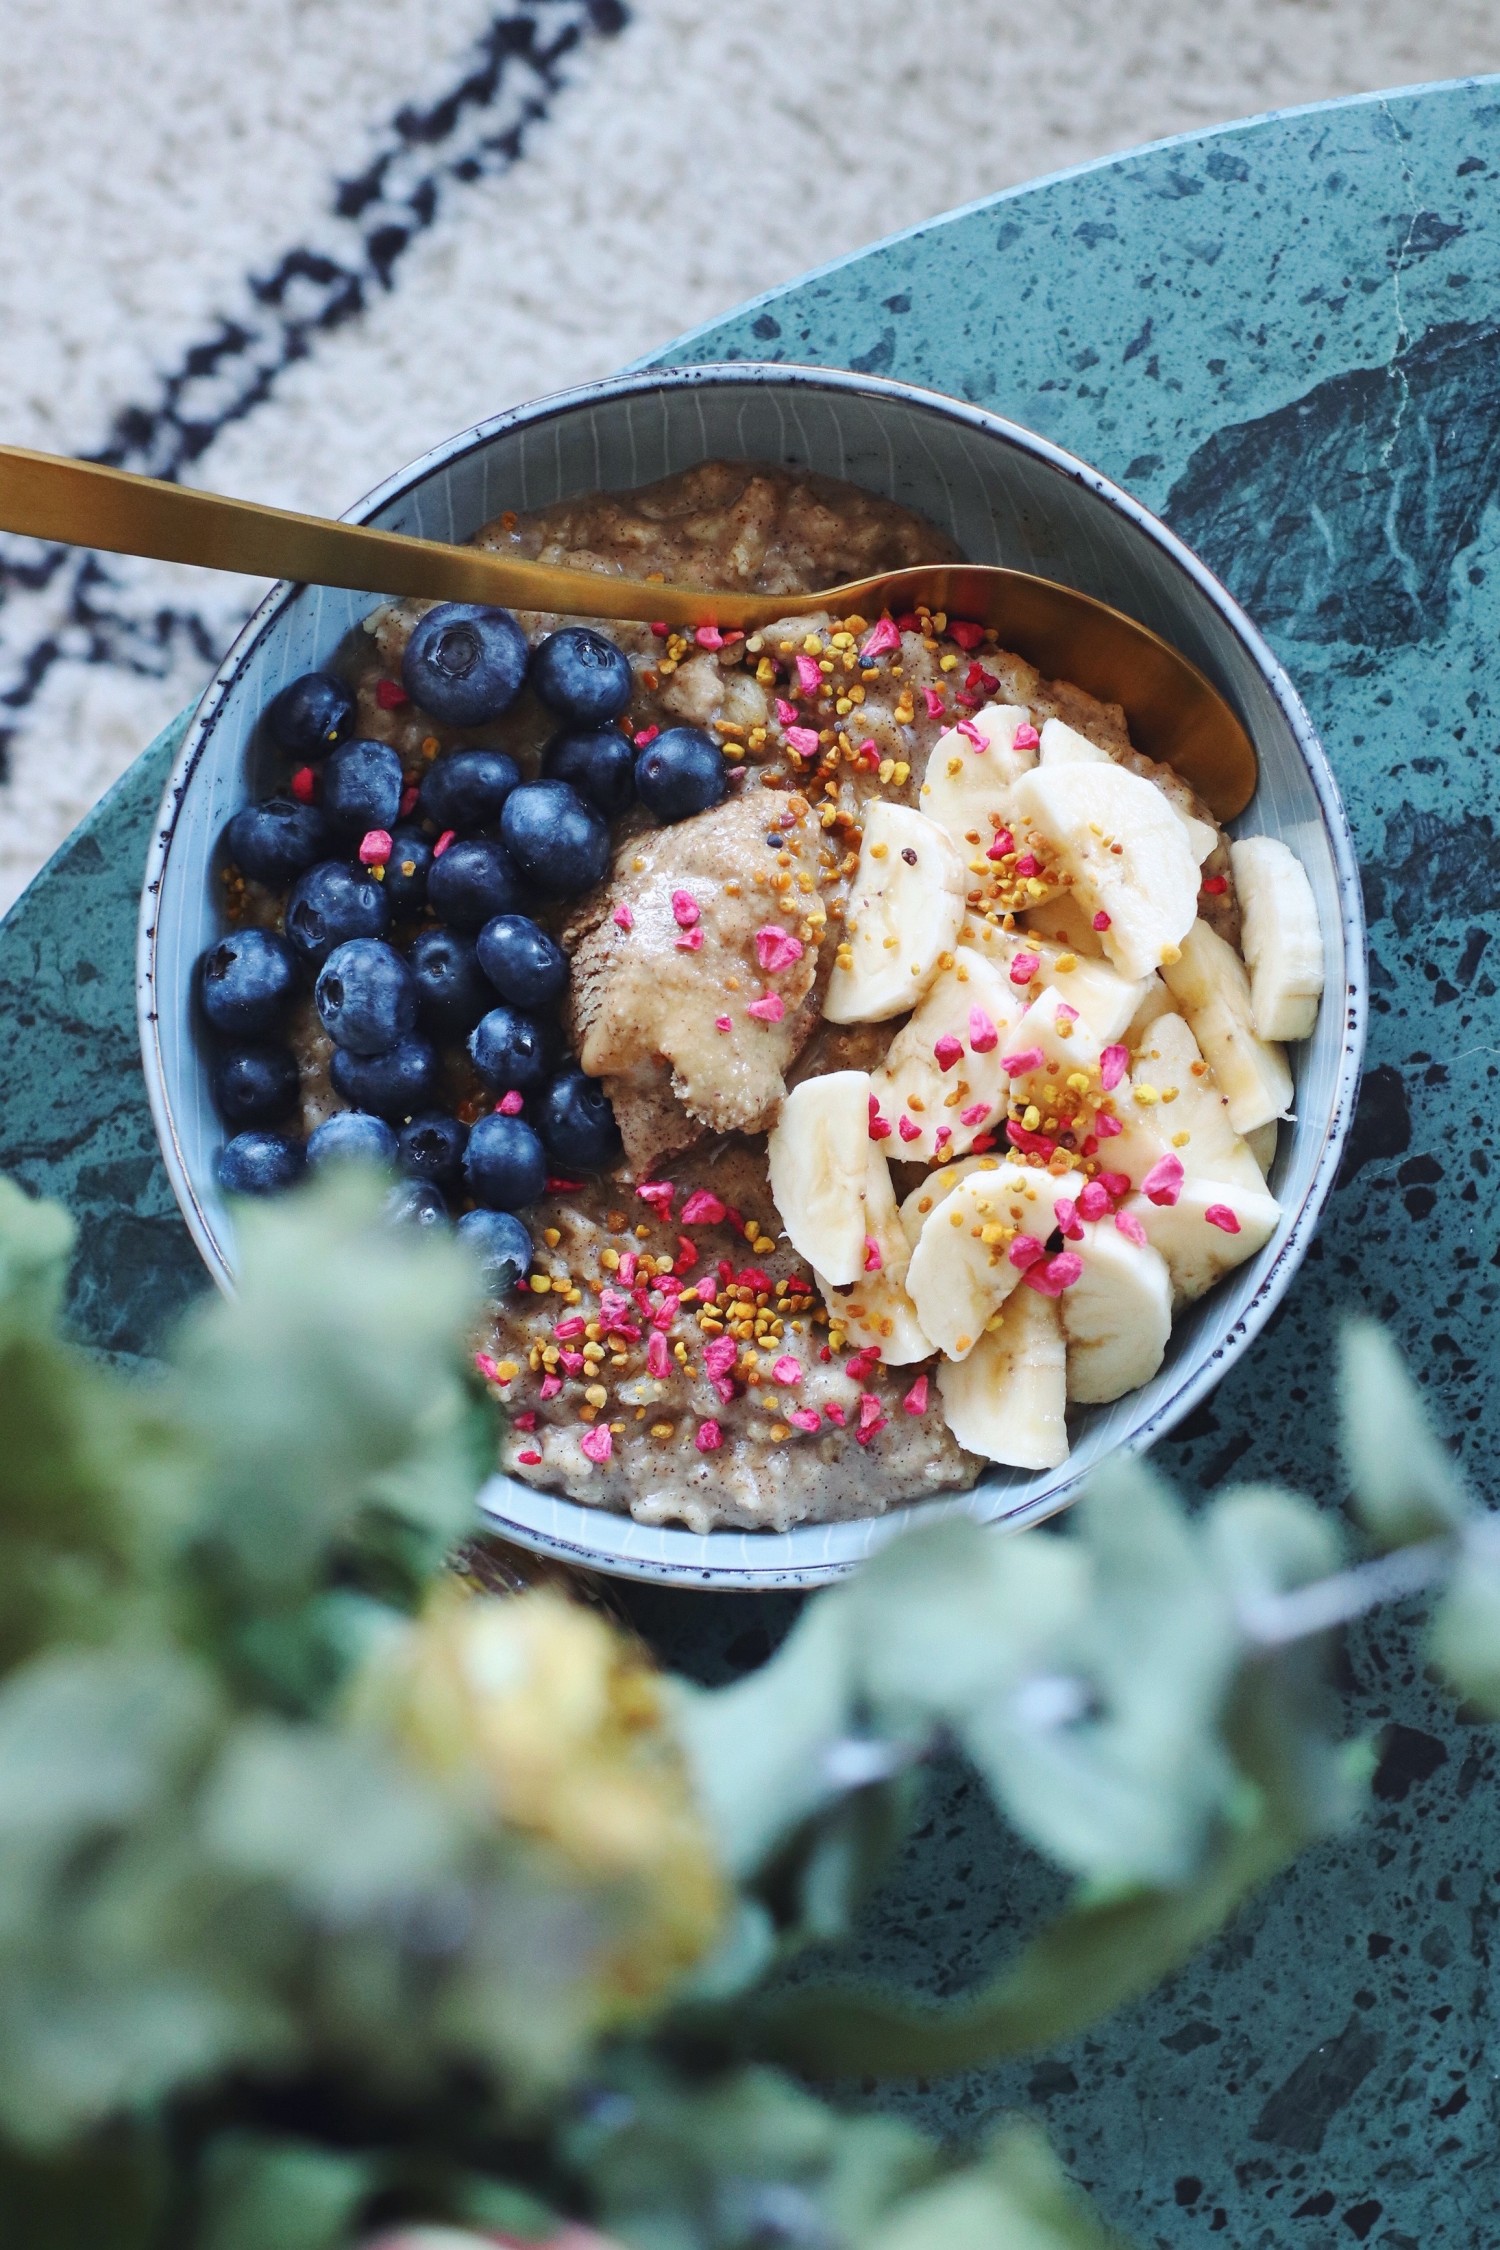 My go-to easy oatmeal // Delicious, filling and warming